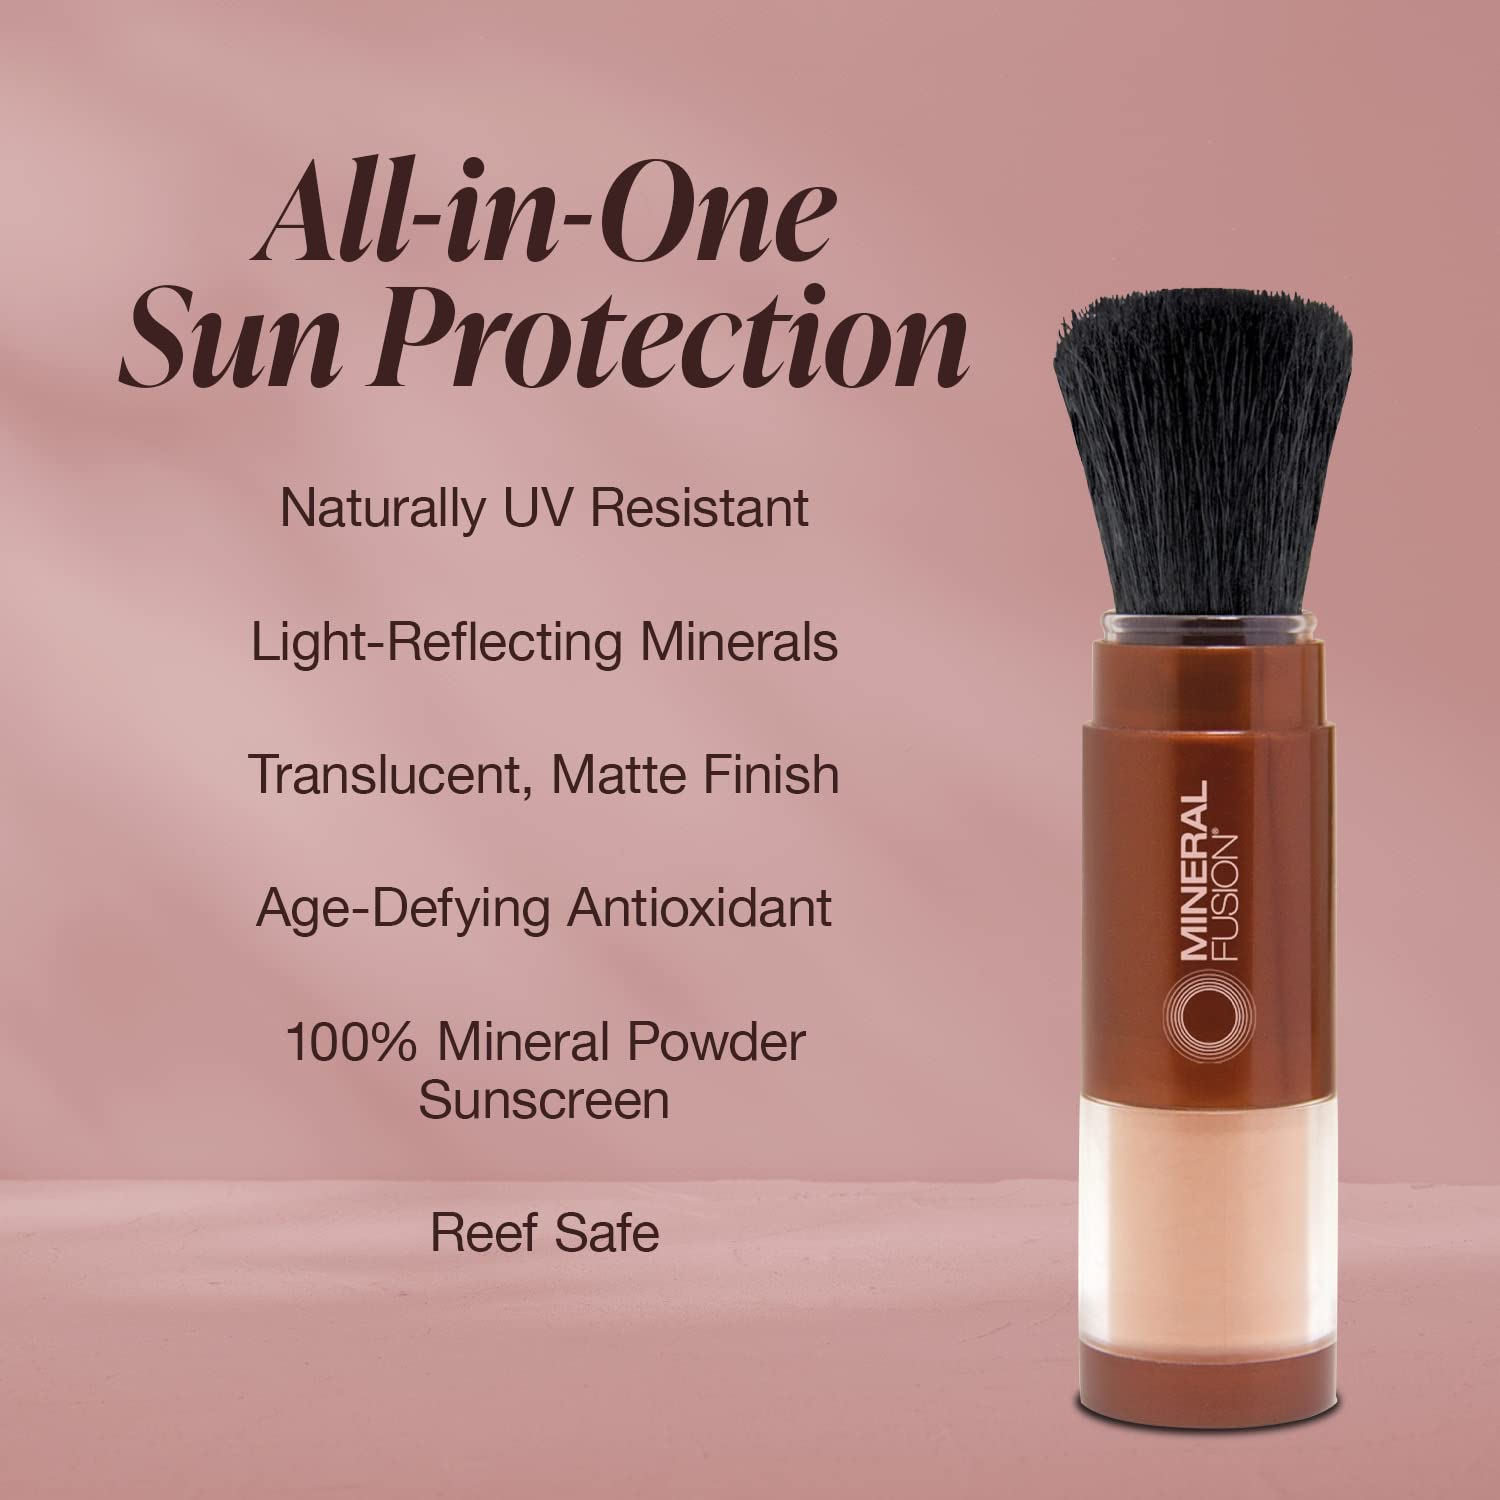 Mineral Fusion Brush-On Sun Defense, SPF 30, UVA and UVB Protection, No Parabens, Gluten Free, Vegetarian, No Phthalates, Hypo-allergenic 0.14 Ounce (Pack of 1)